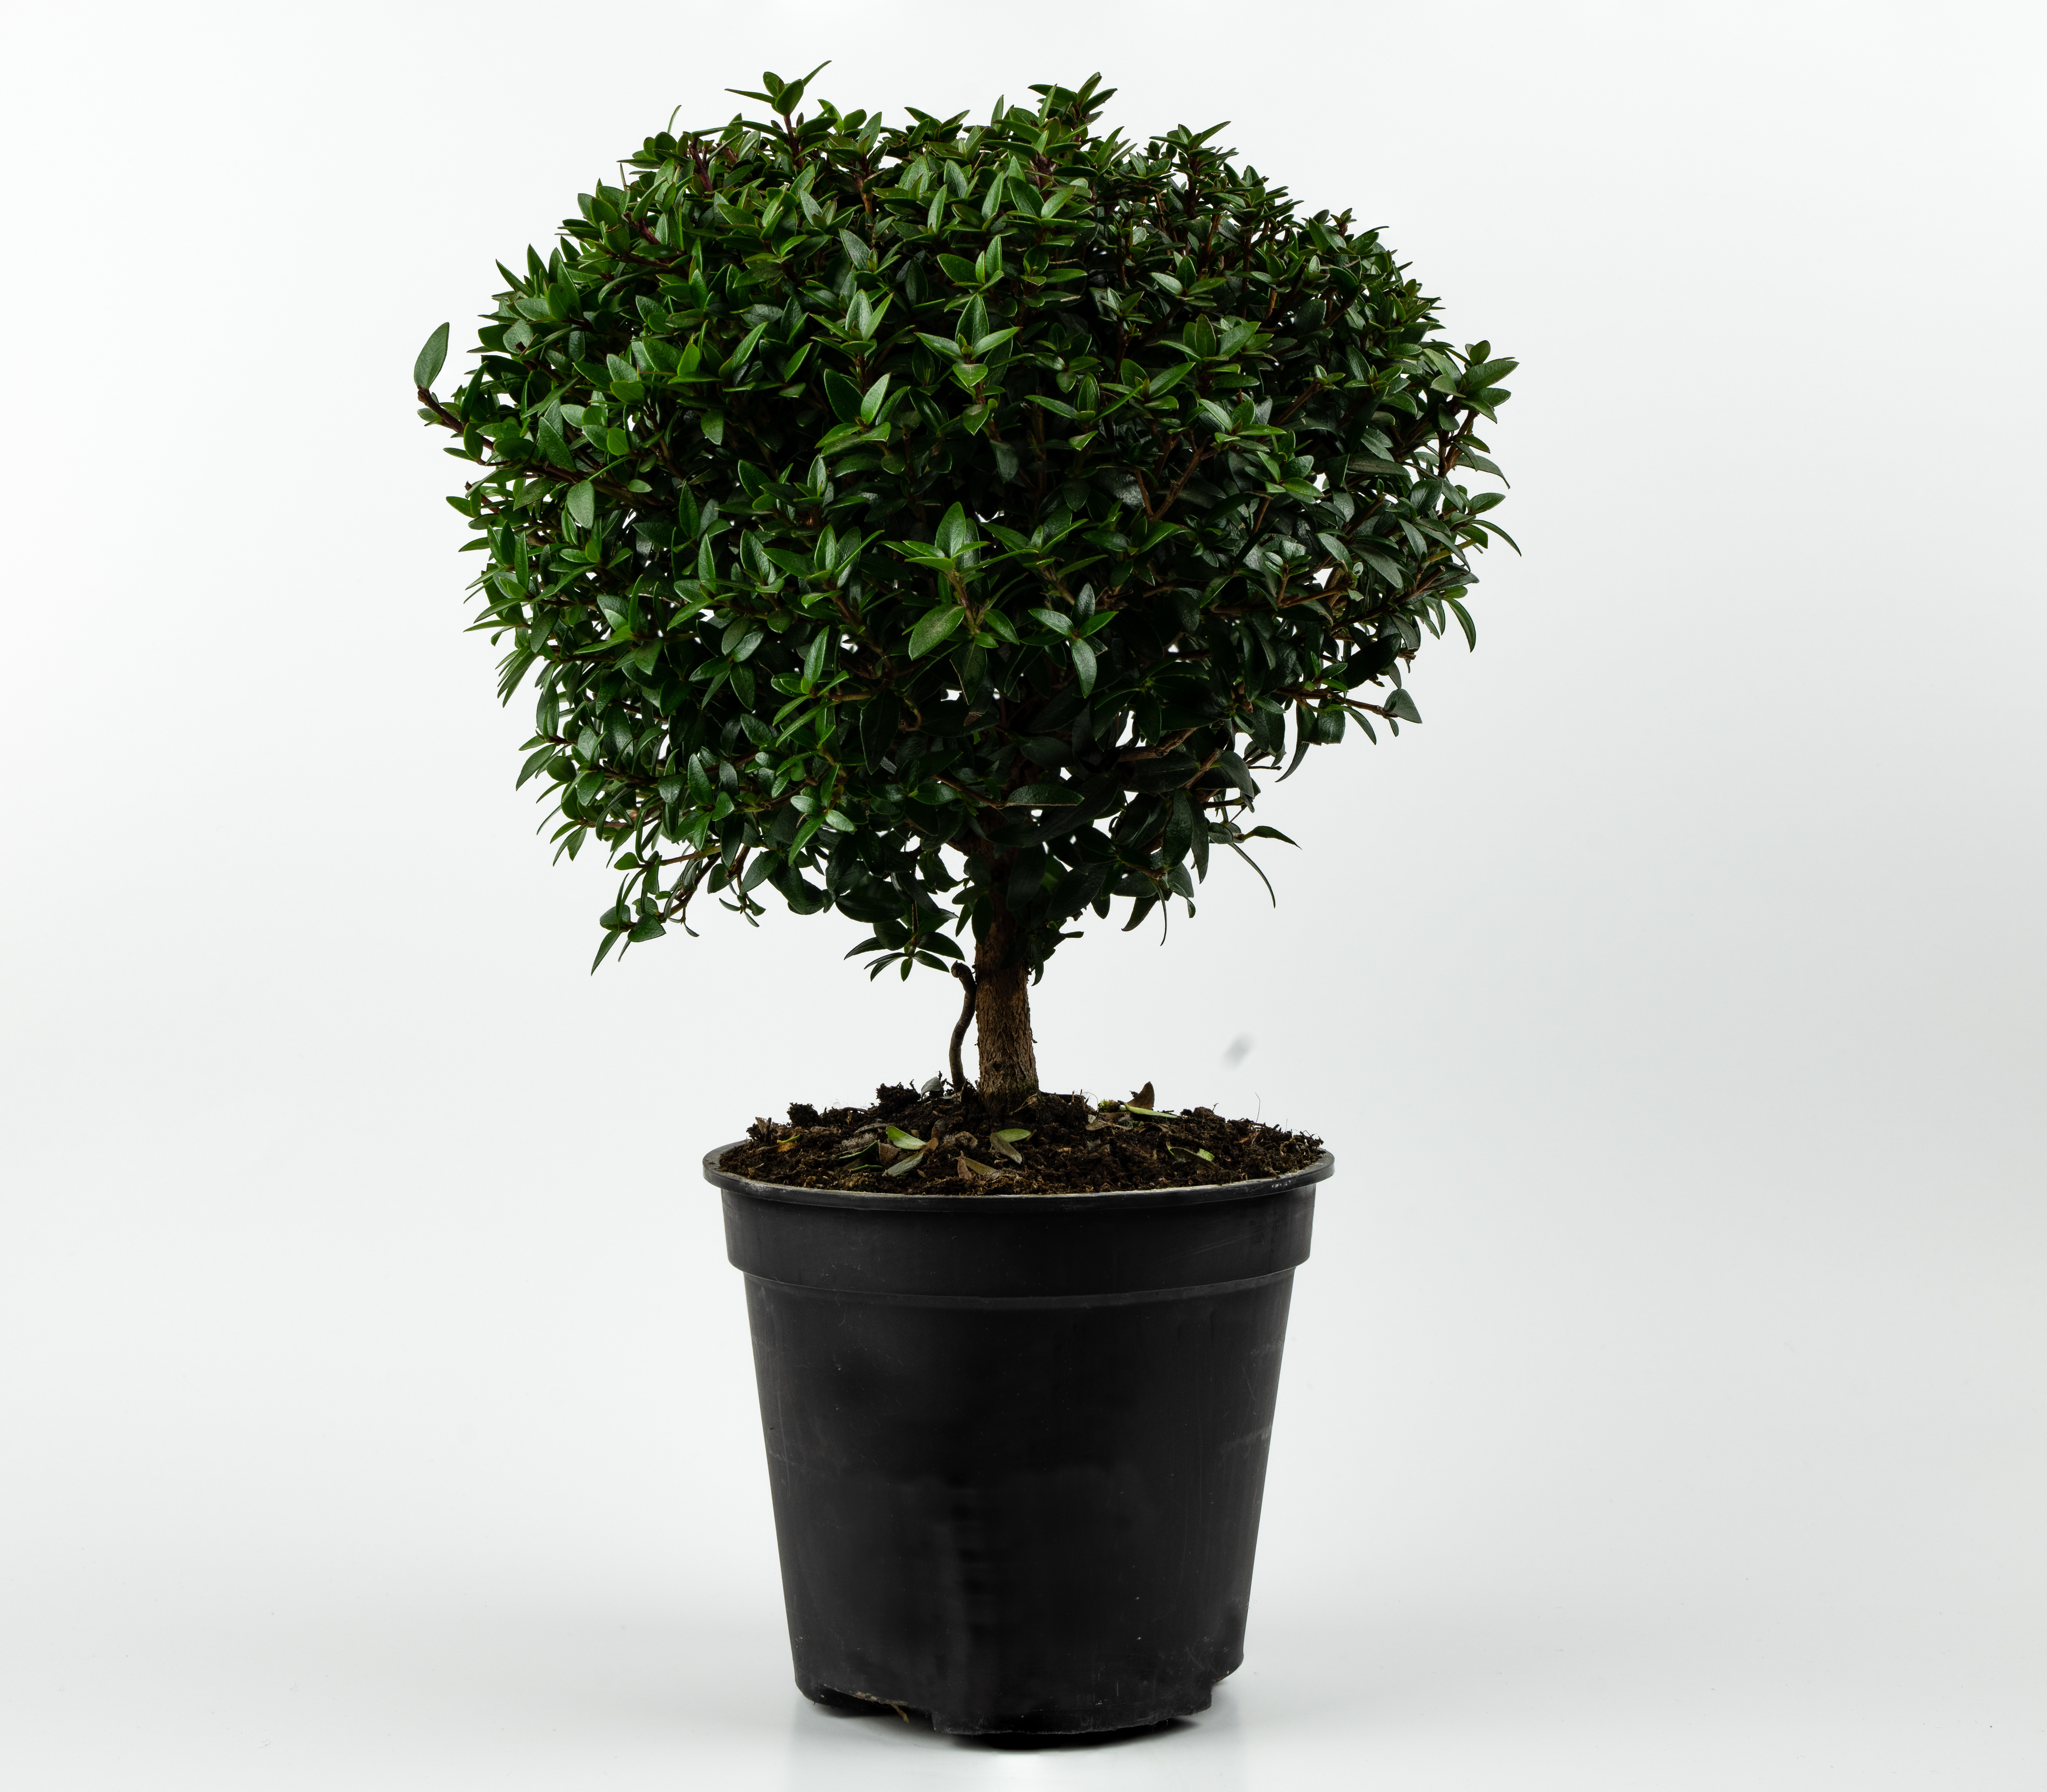 The best way to overwintering your Common Myrtle